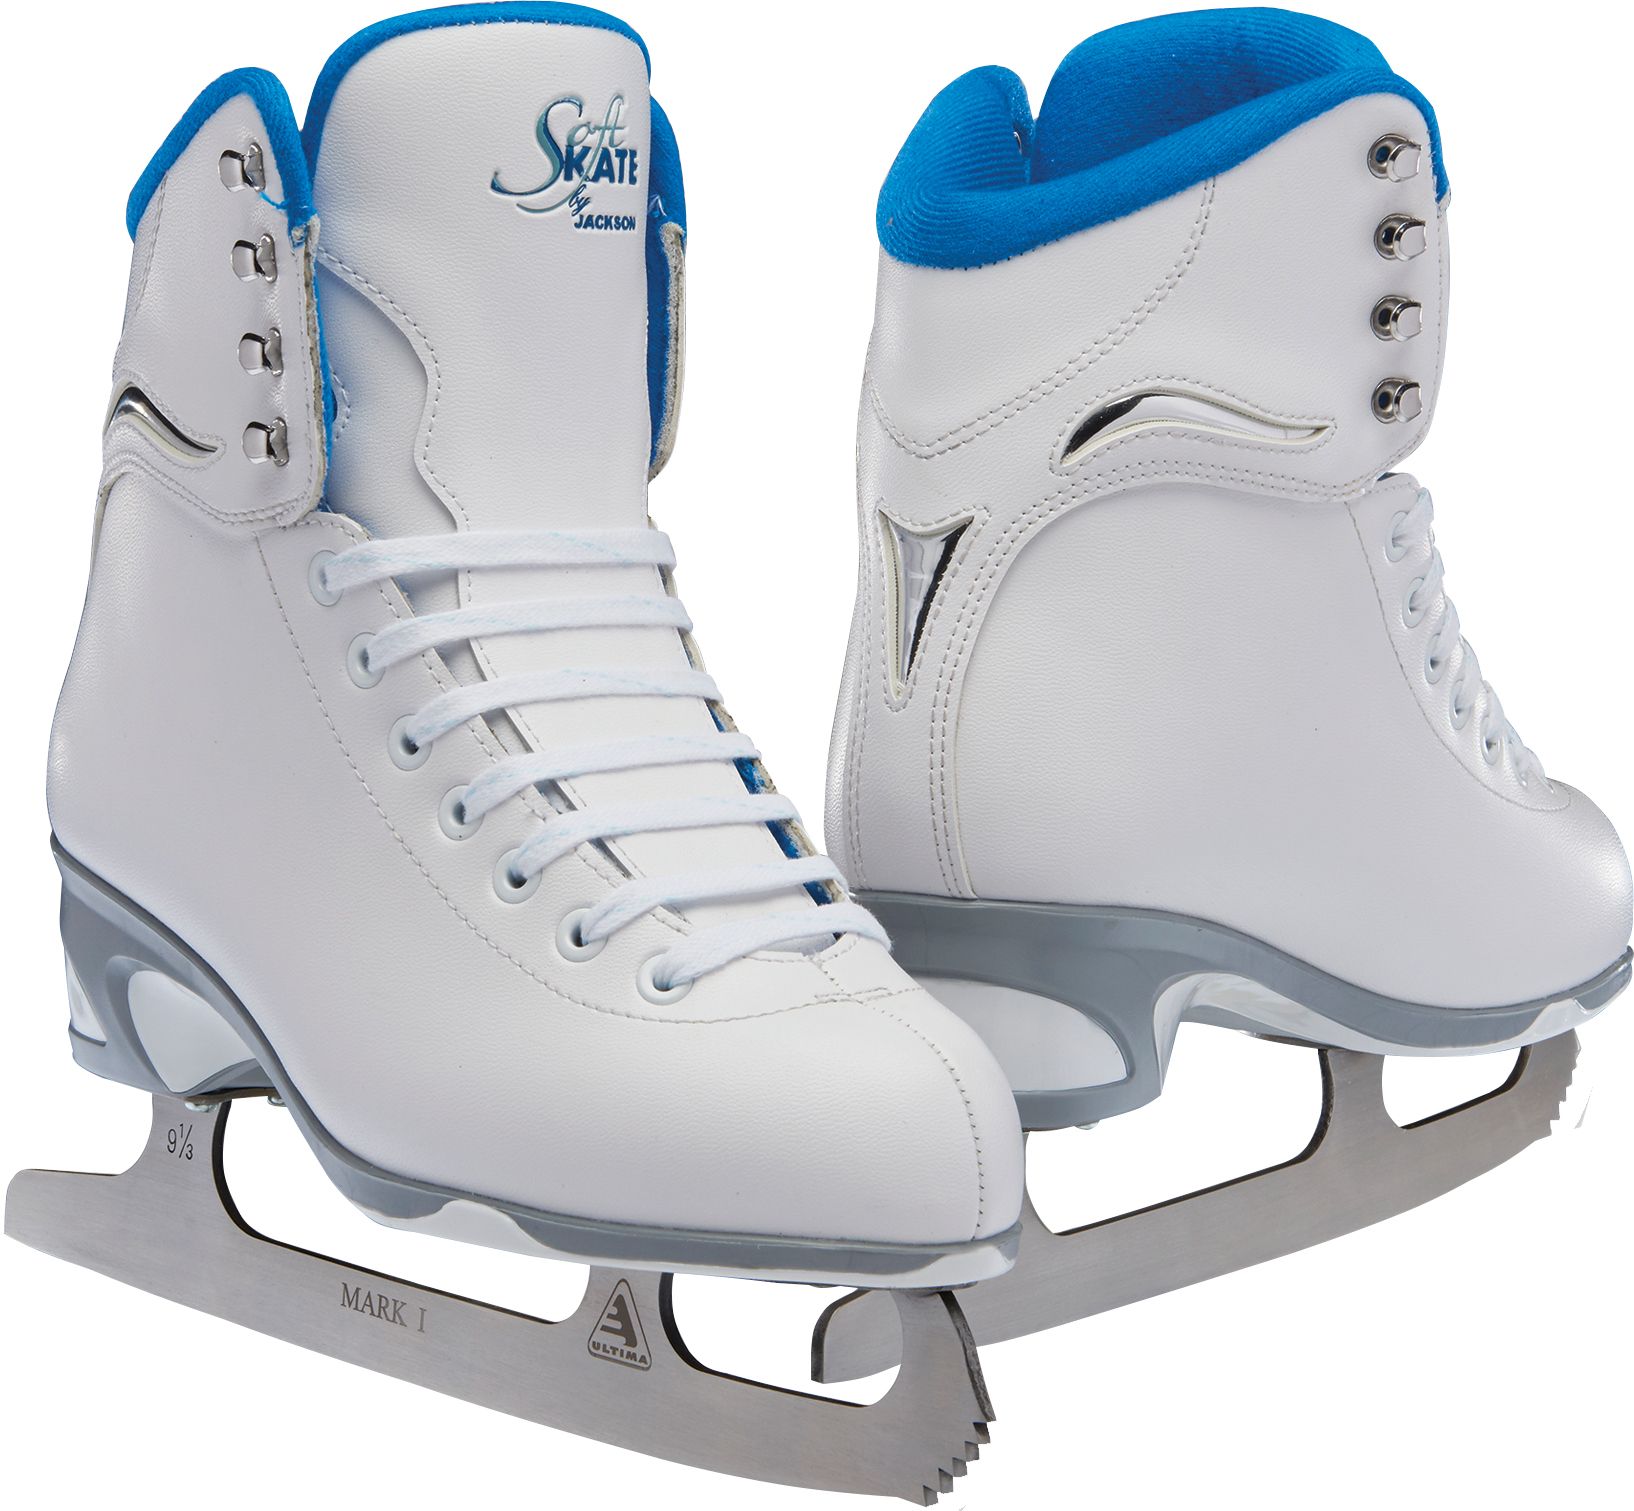 places to buy ice skates